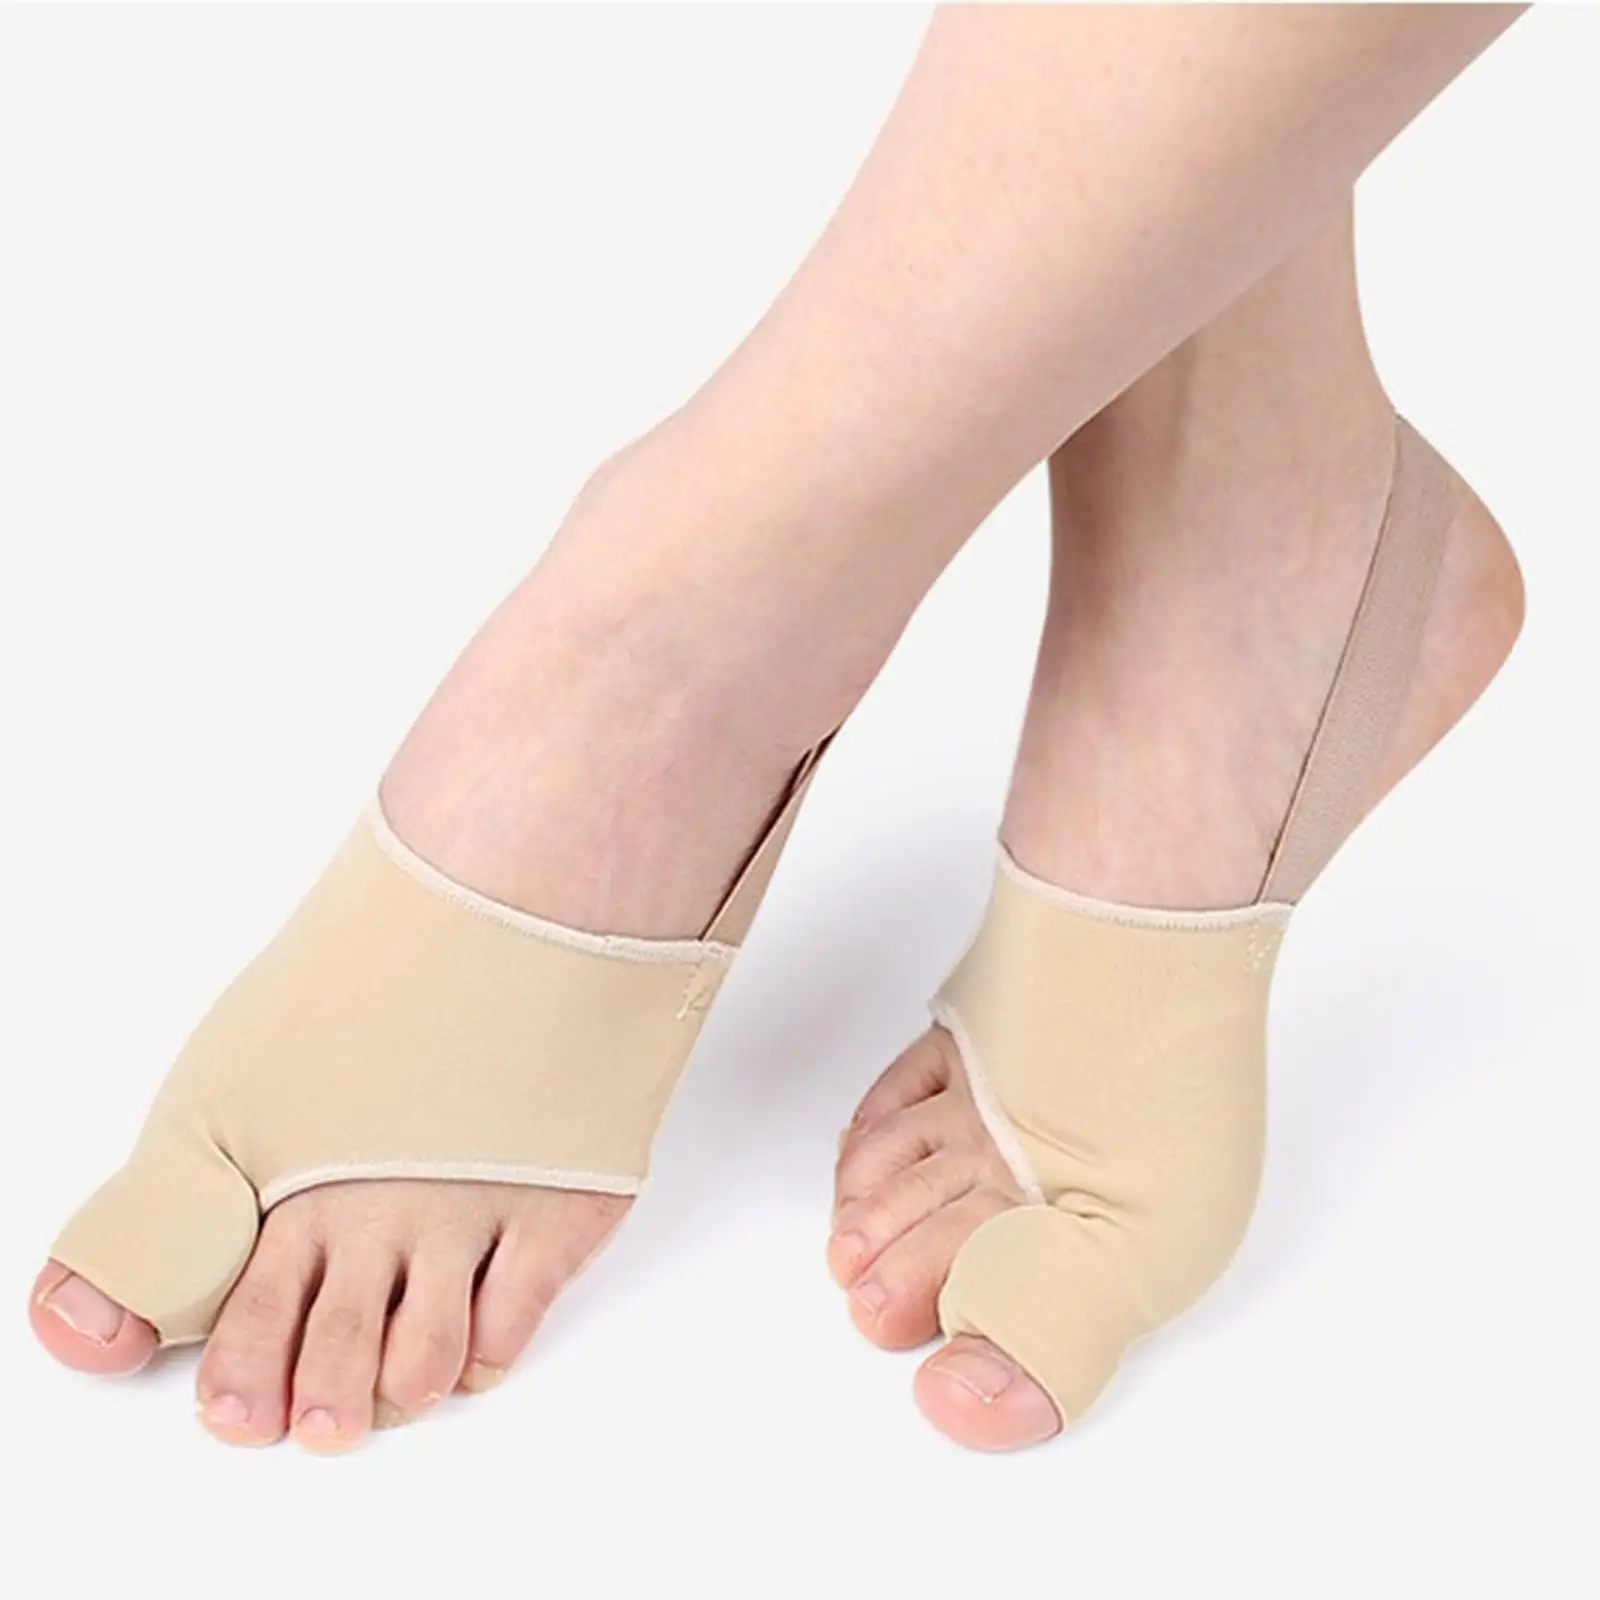 2 Pieces Bunion Corrector Non-Surgical Day Night Support Protector Sleeves for Women & Men